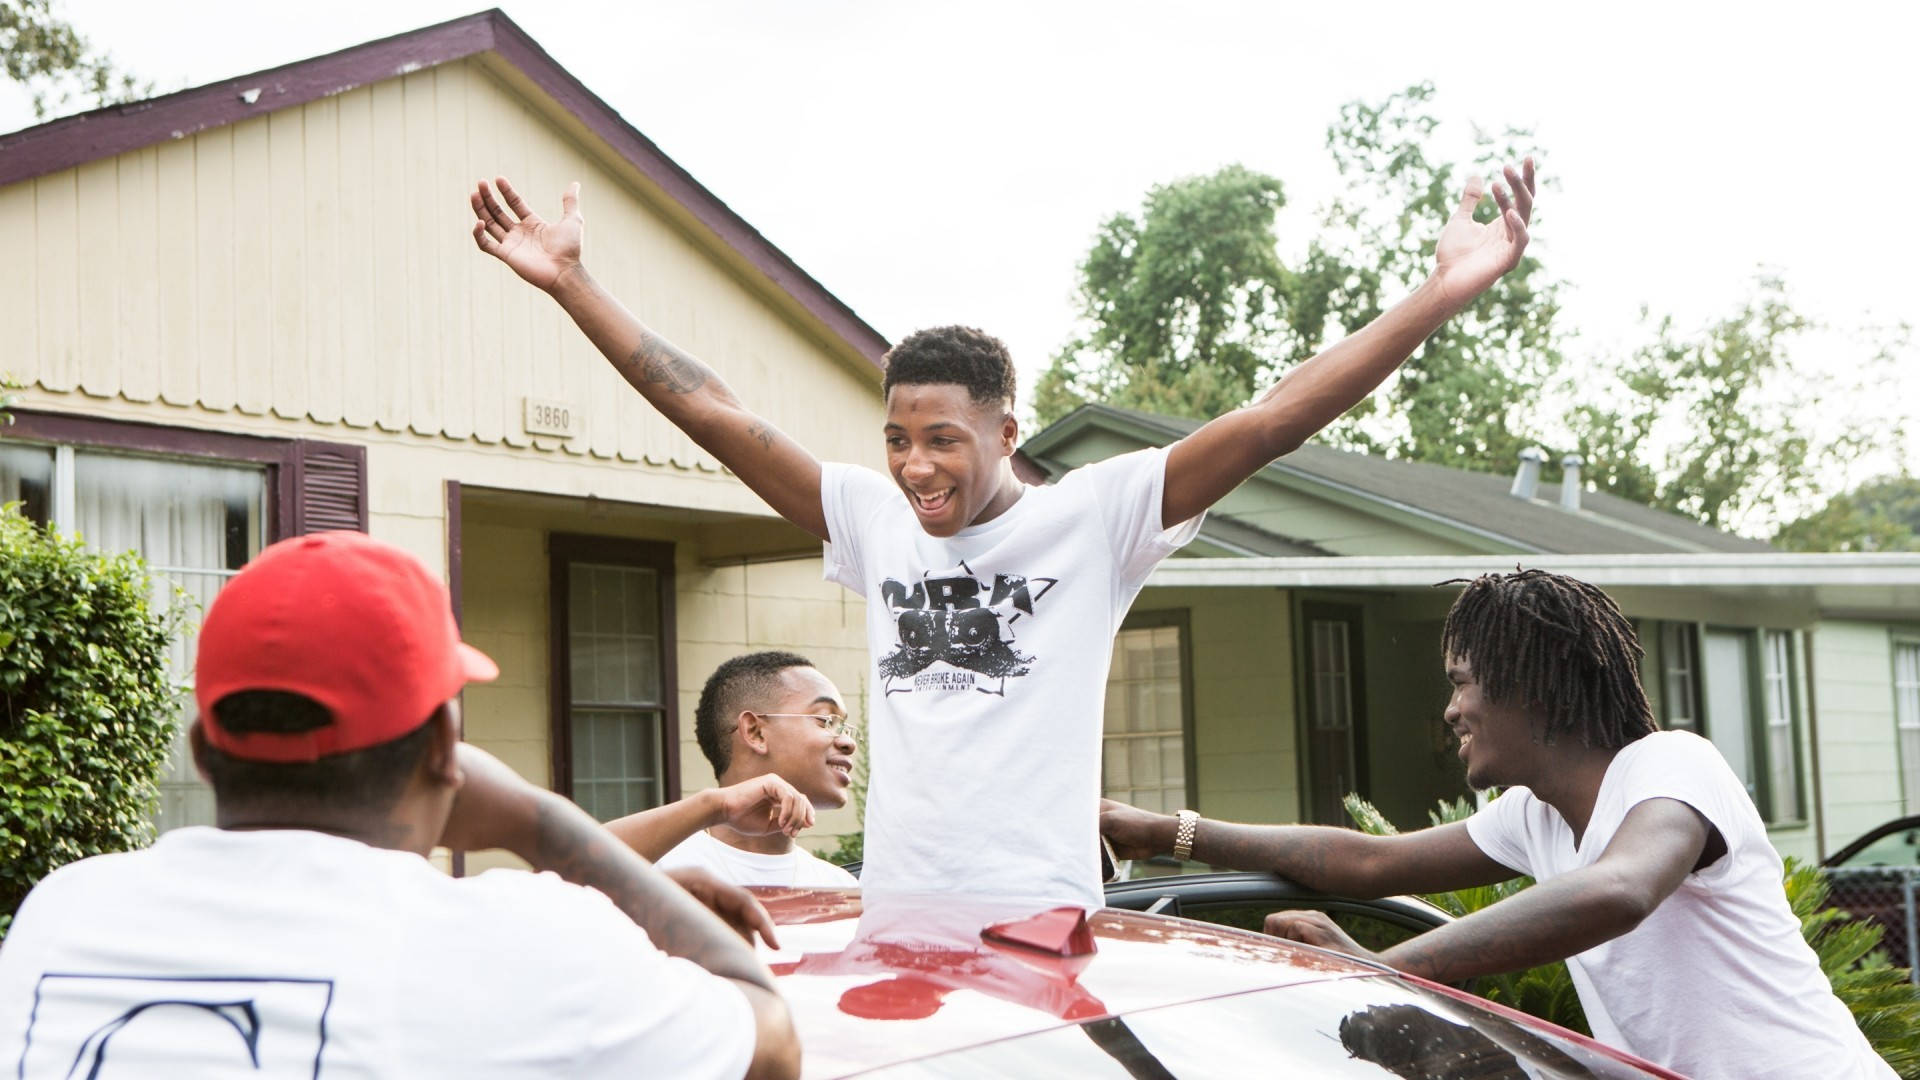 NBA Youngboy enjoying time with friends Wallpaper